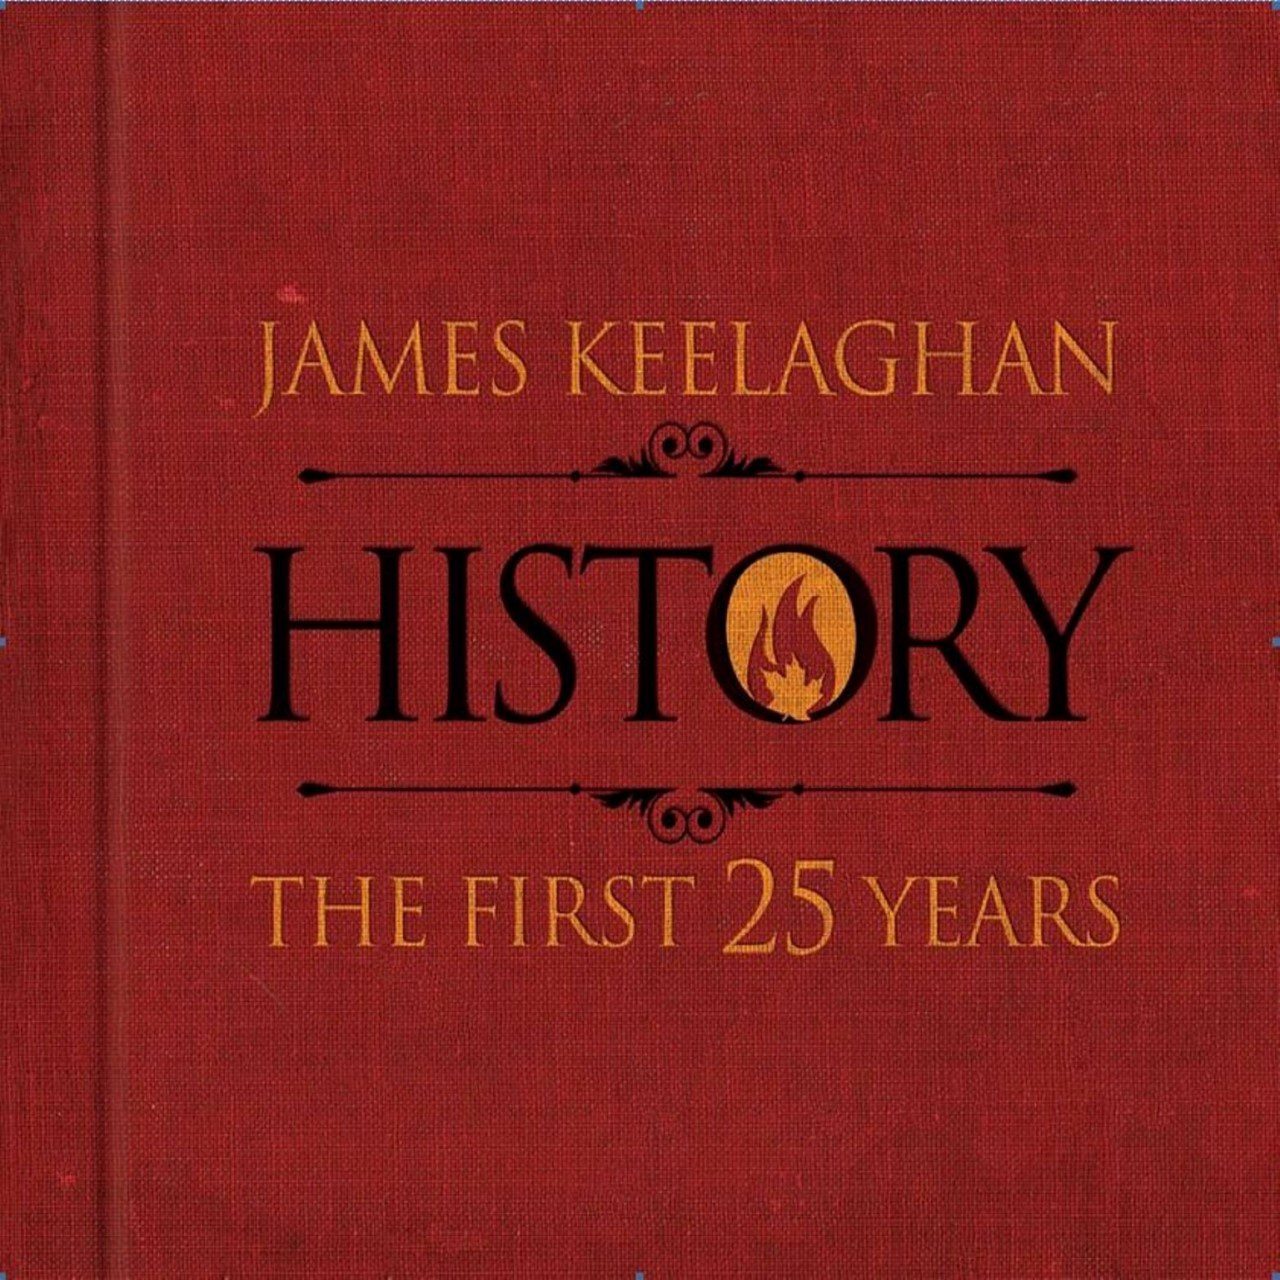 James Keelaghan - History – The First 25 Years cover album